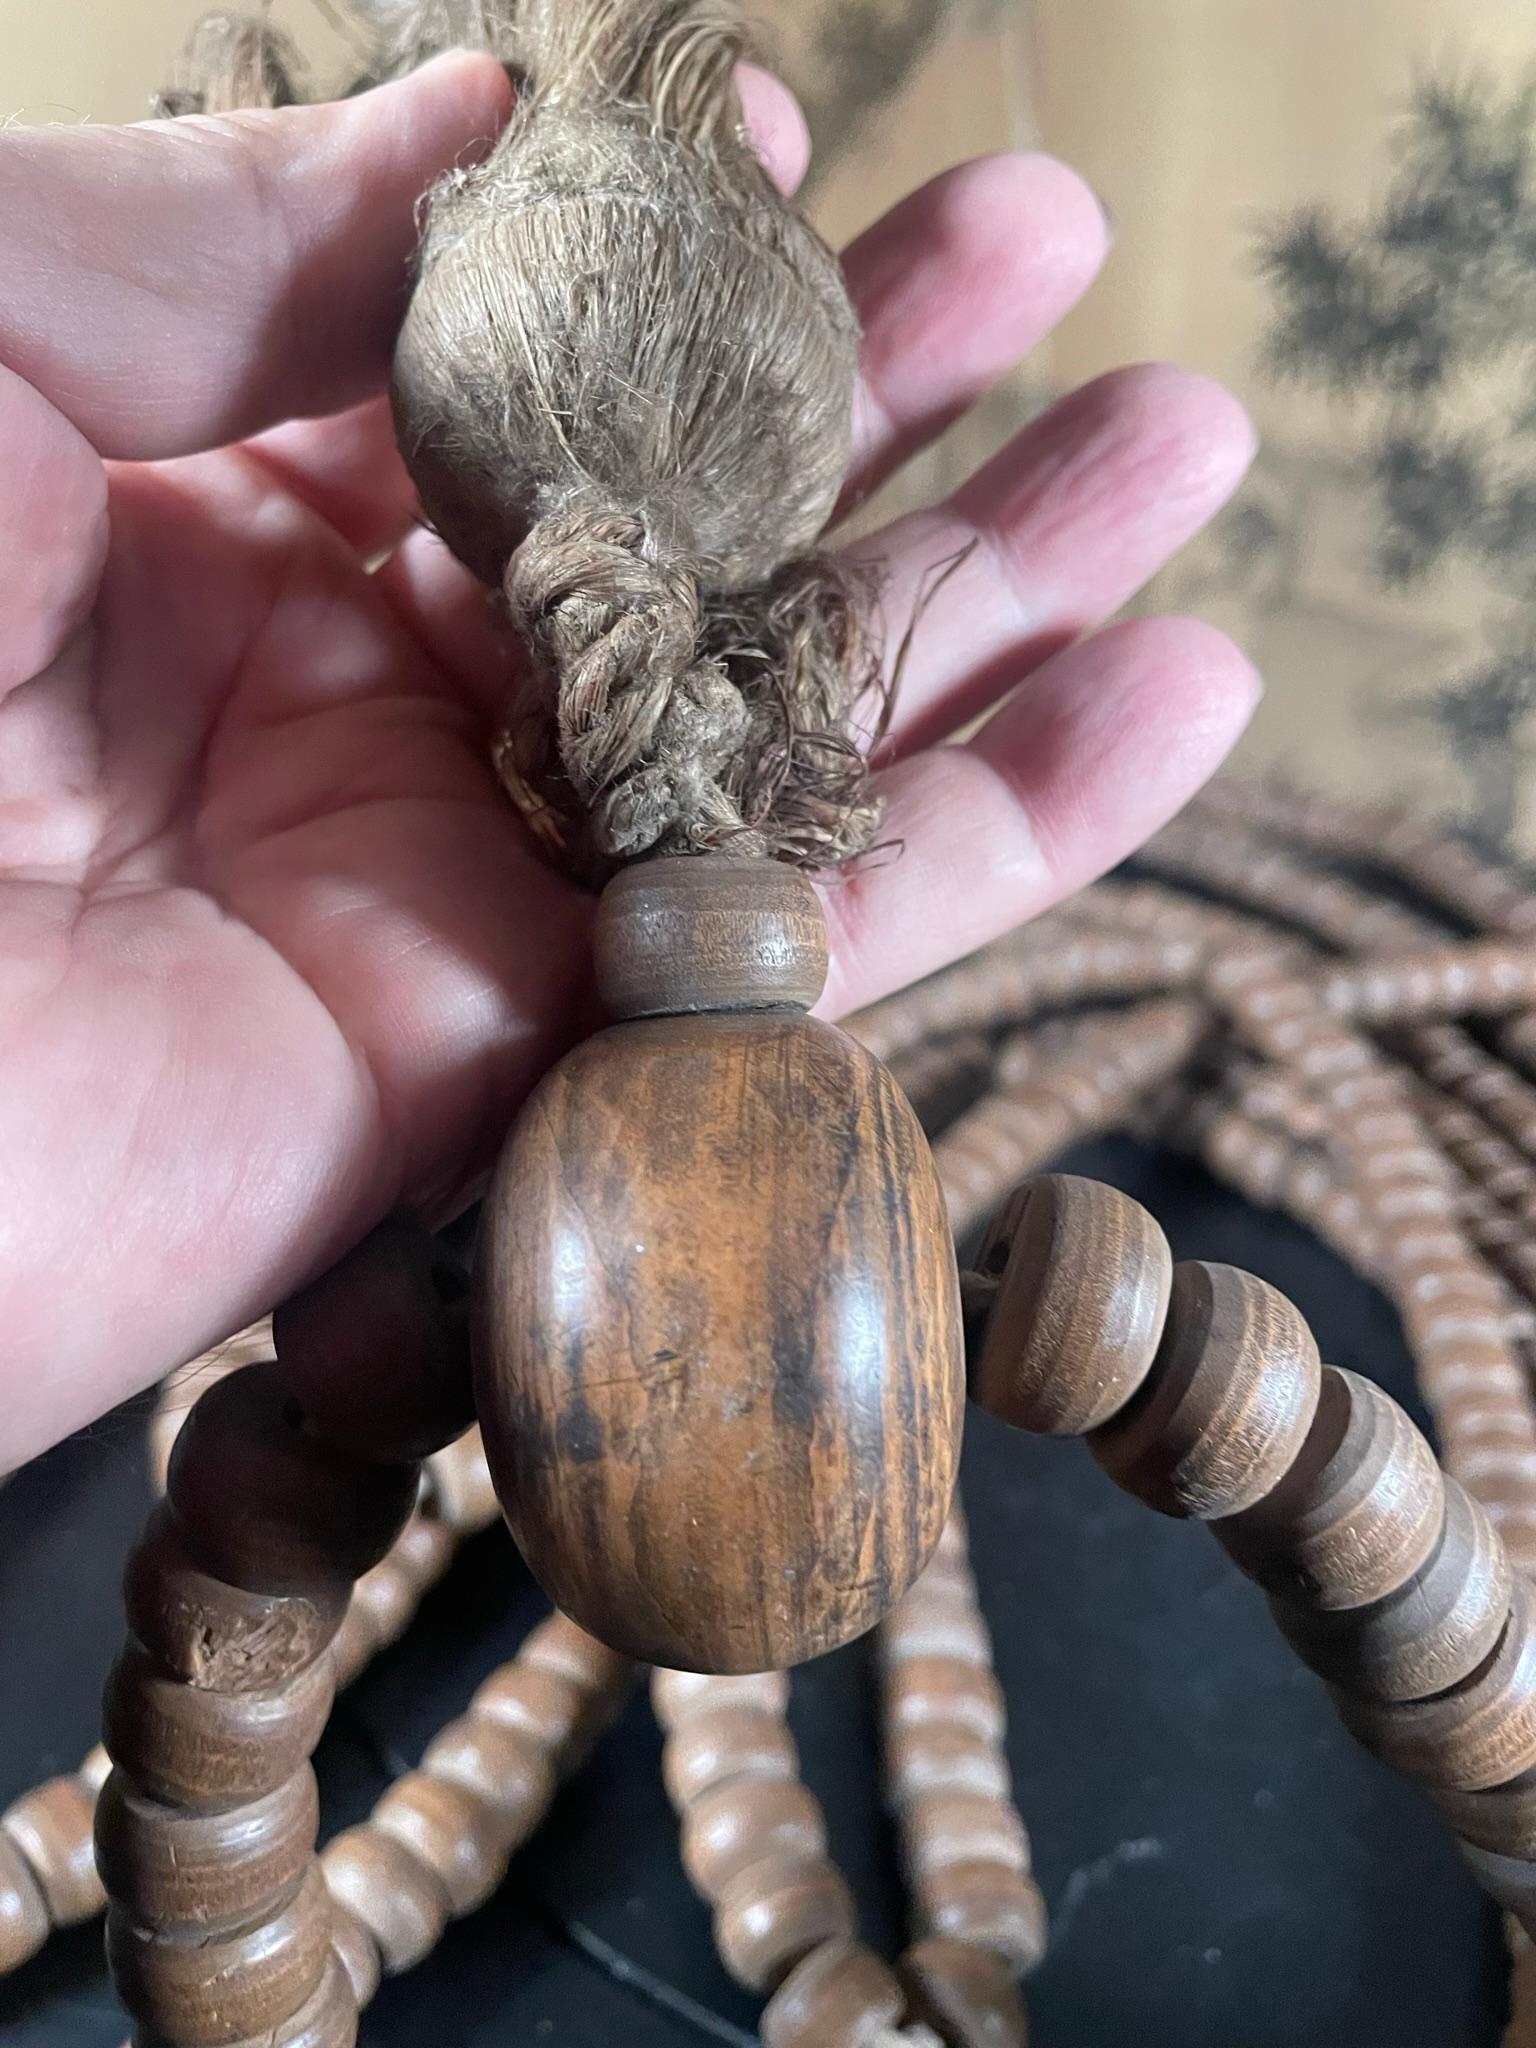 Japanese Antique Zen Rosewood Mala Prayer Bead String 800 Beads With Alms Bowl In Good Condition For Sale In South Burlington, VT